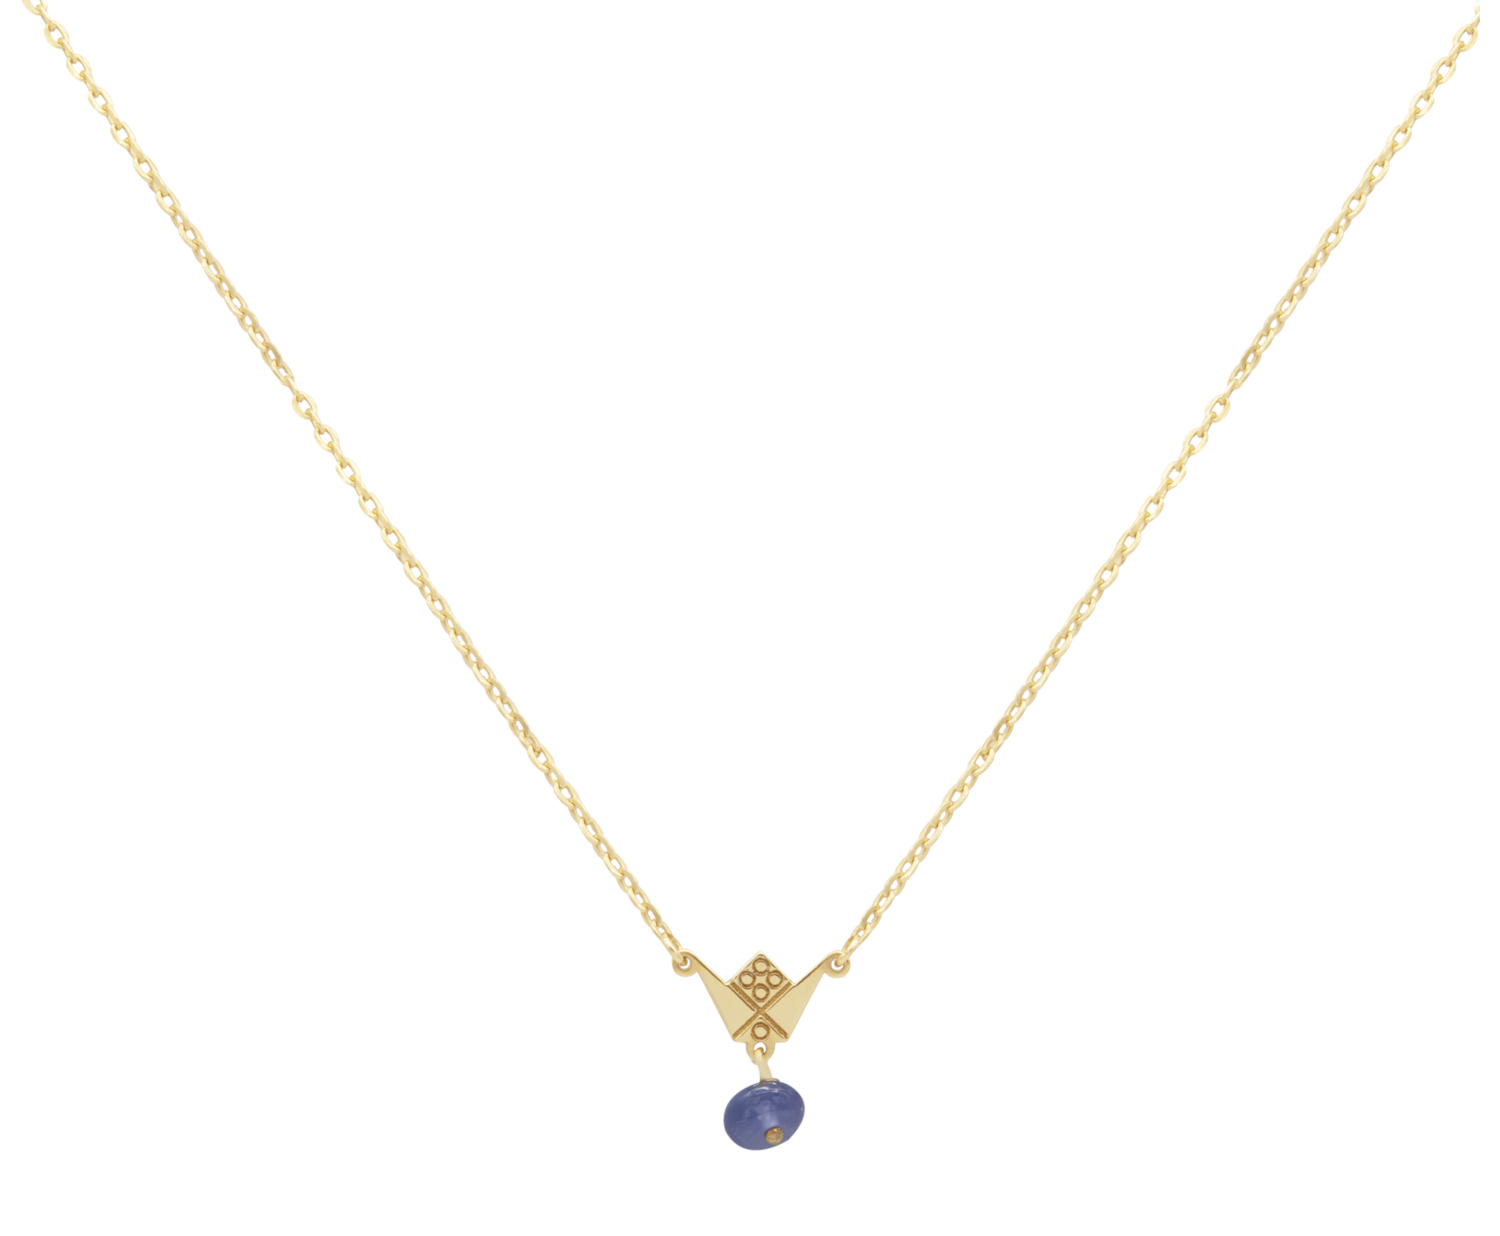 Emblem Gold Necklace with Colored Stone